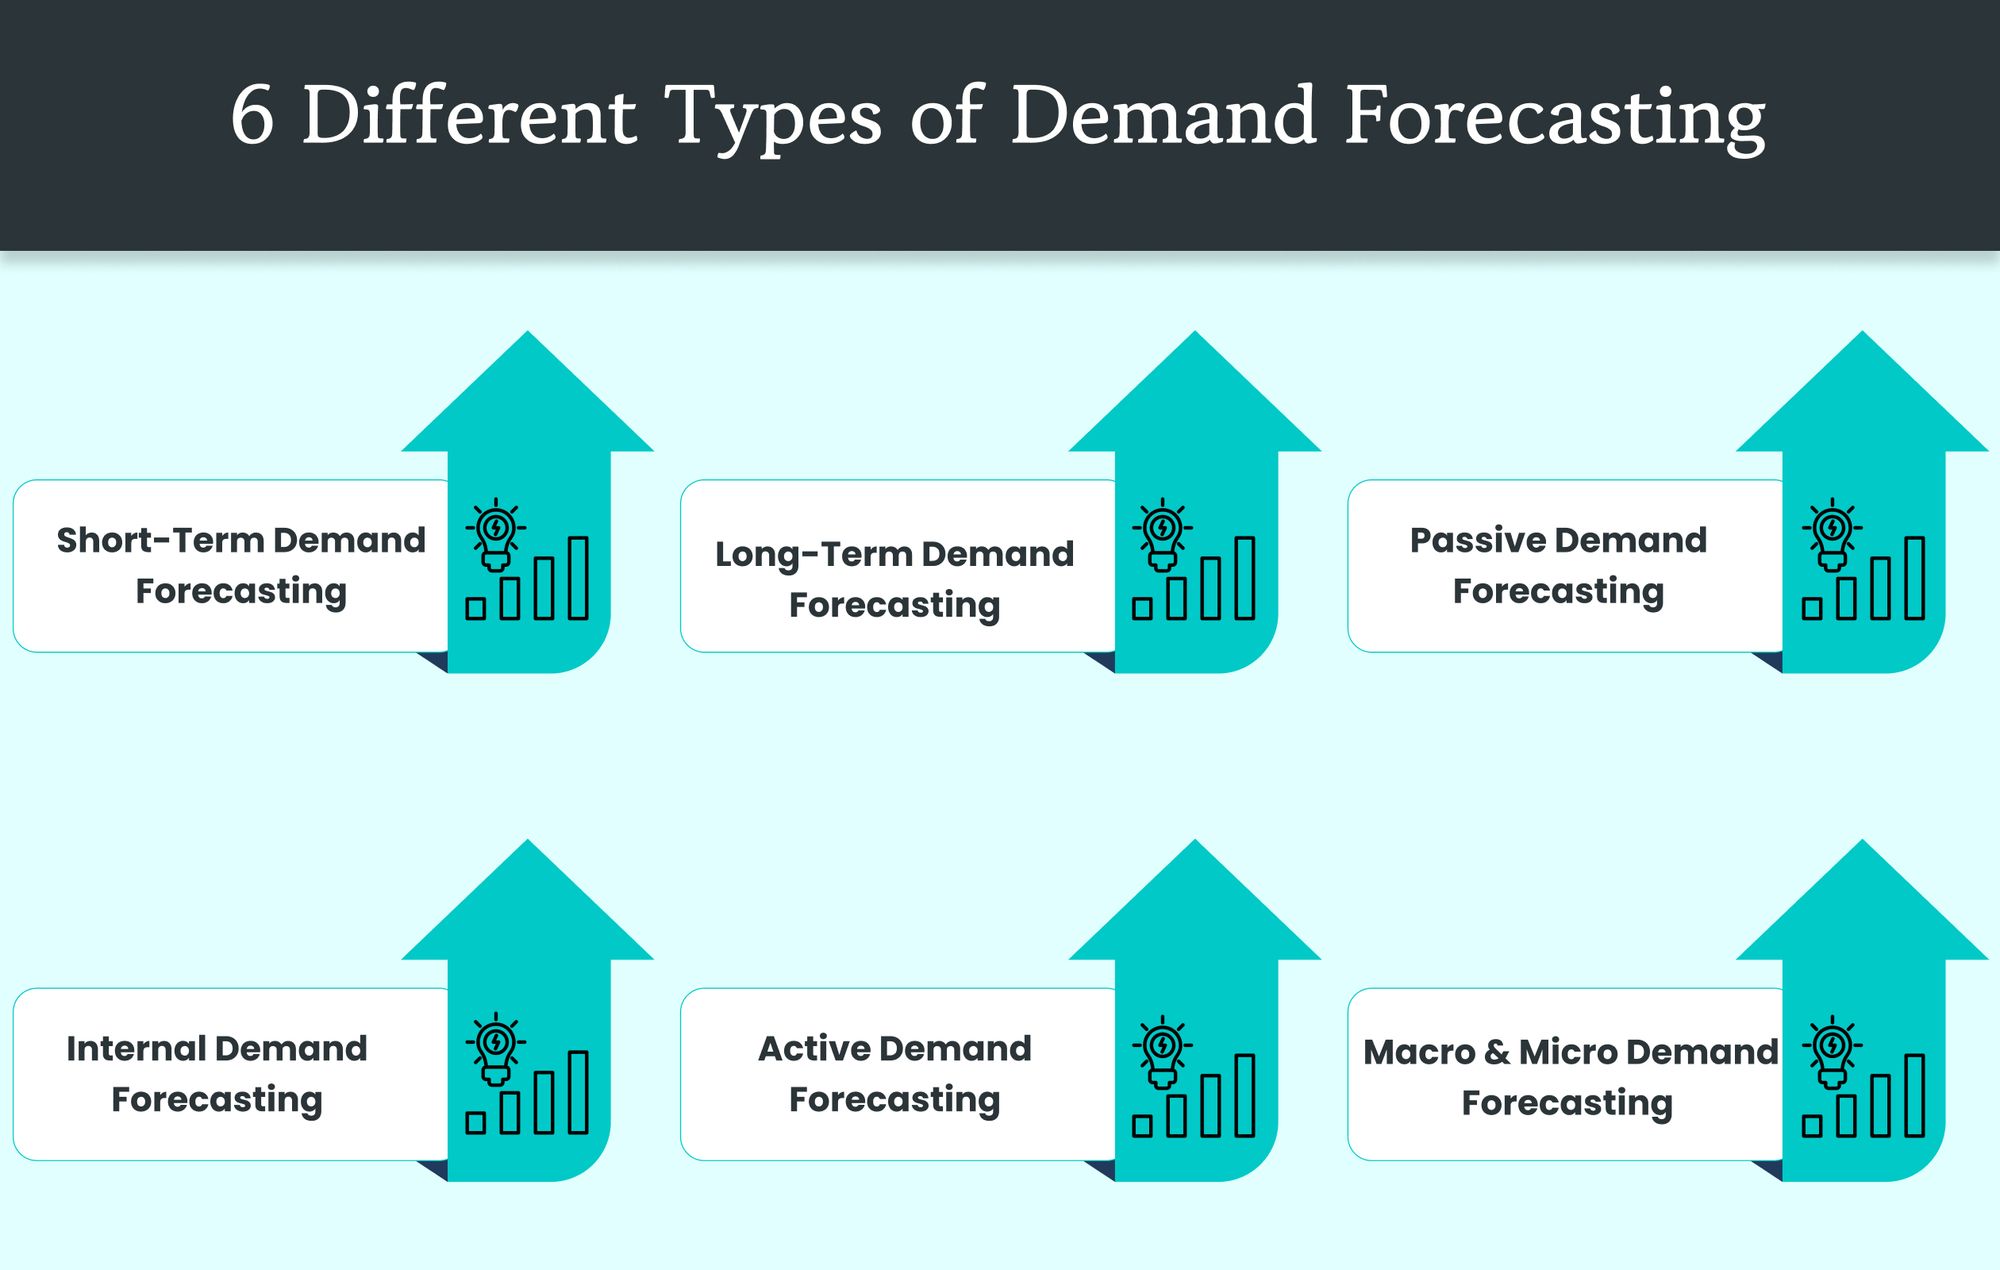 6 Different Types of Demand Forecasting